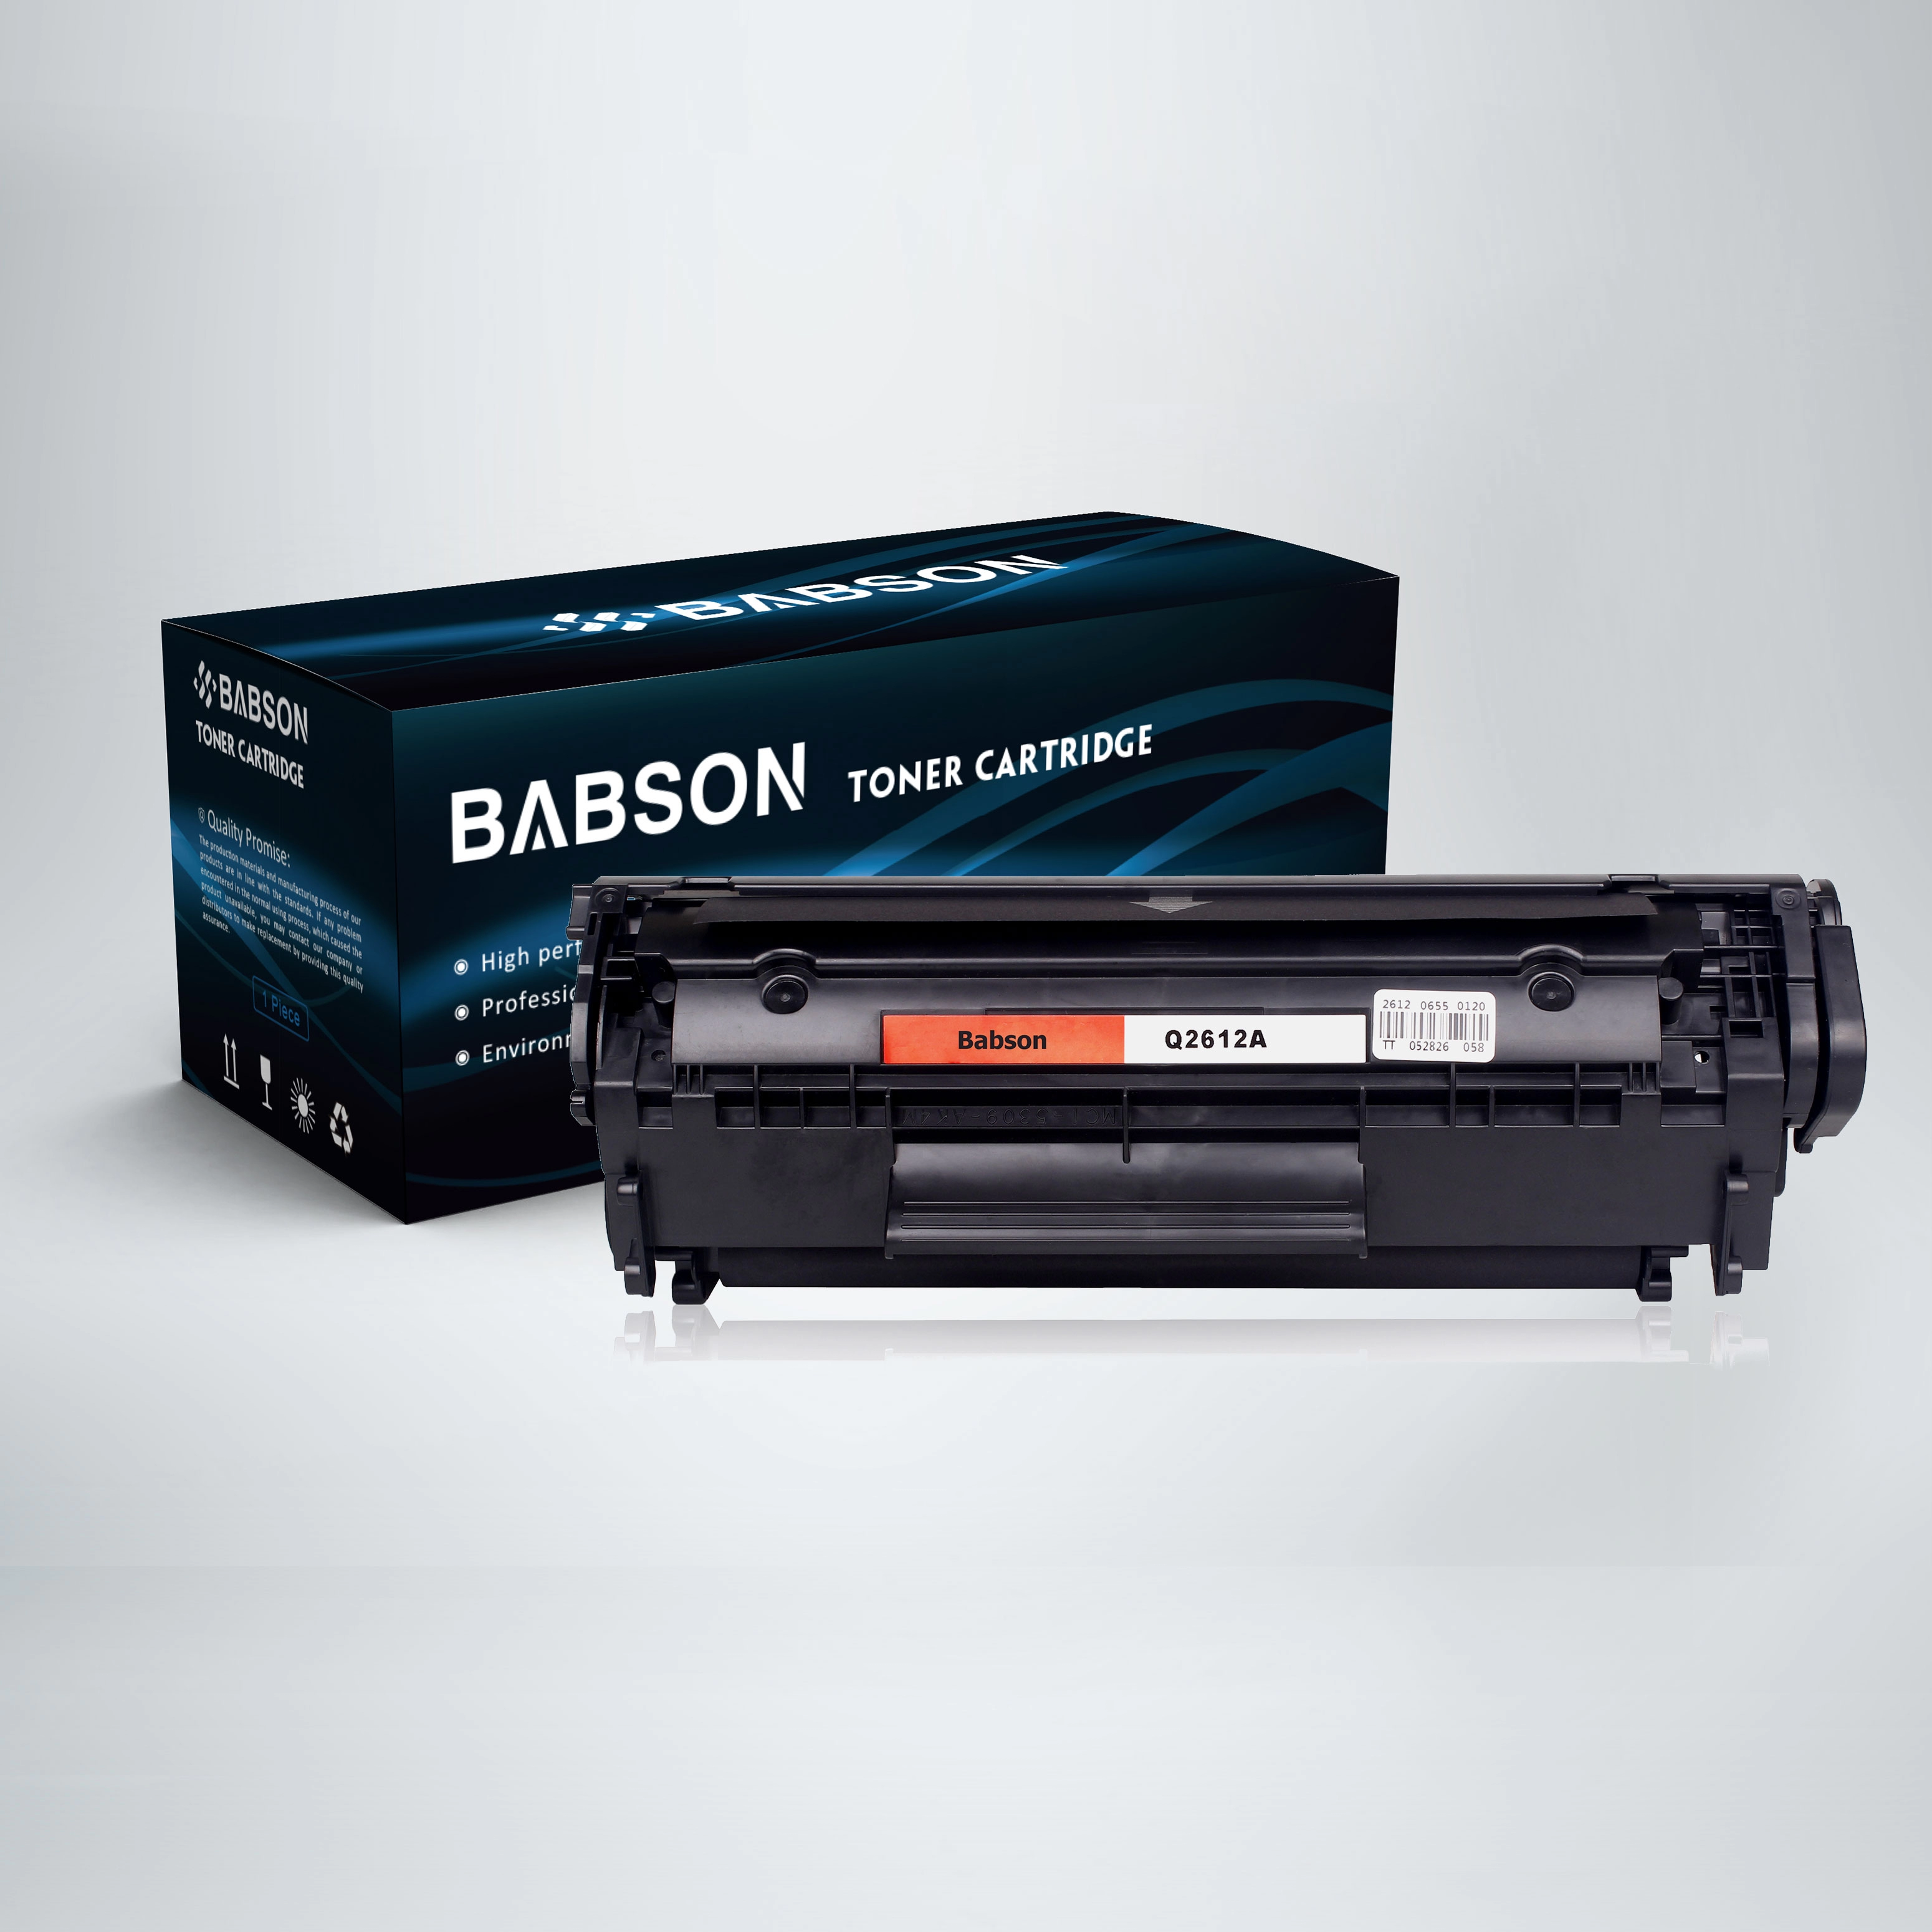 Q2612A  toner cartridge Use For 1010/1012/1015/1018/1022/1022N/1022NW/1020/3015